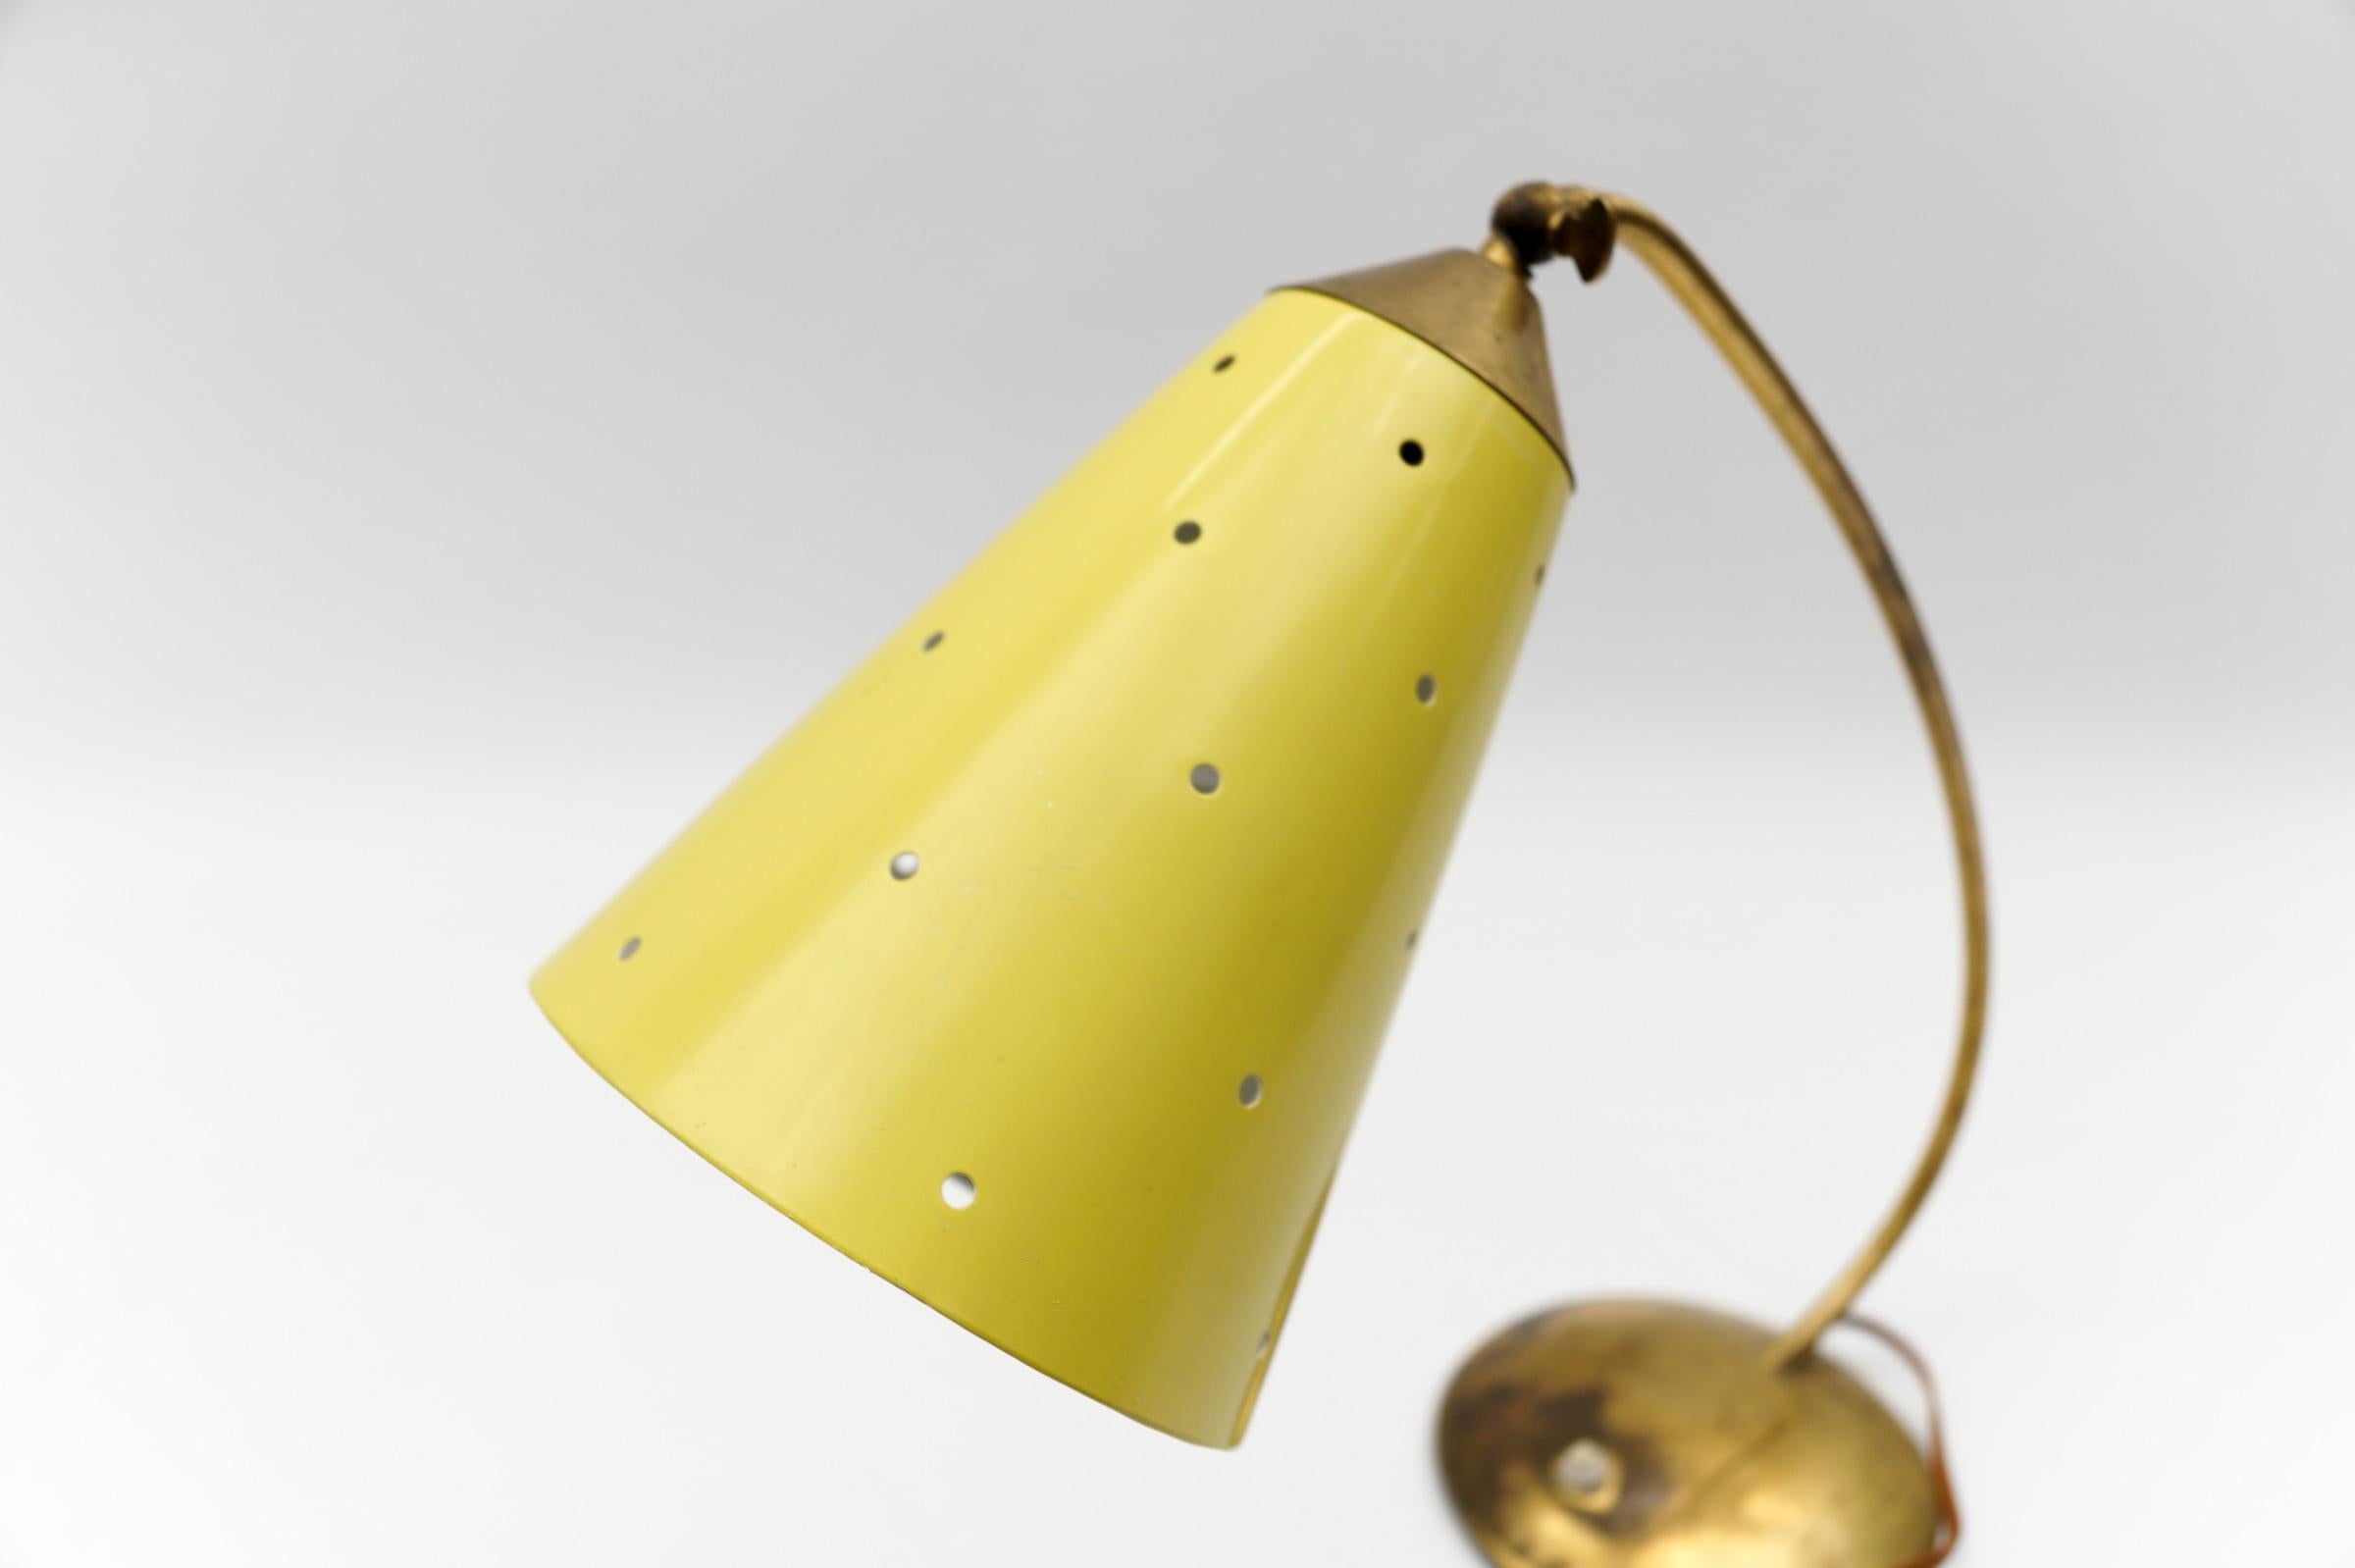 Beautiful Mid-Century Modern Table Lamp in Brass, 1950s Germany For Sale 7